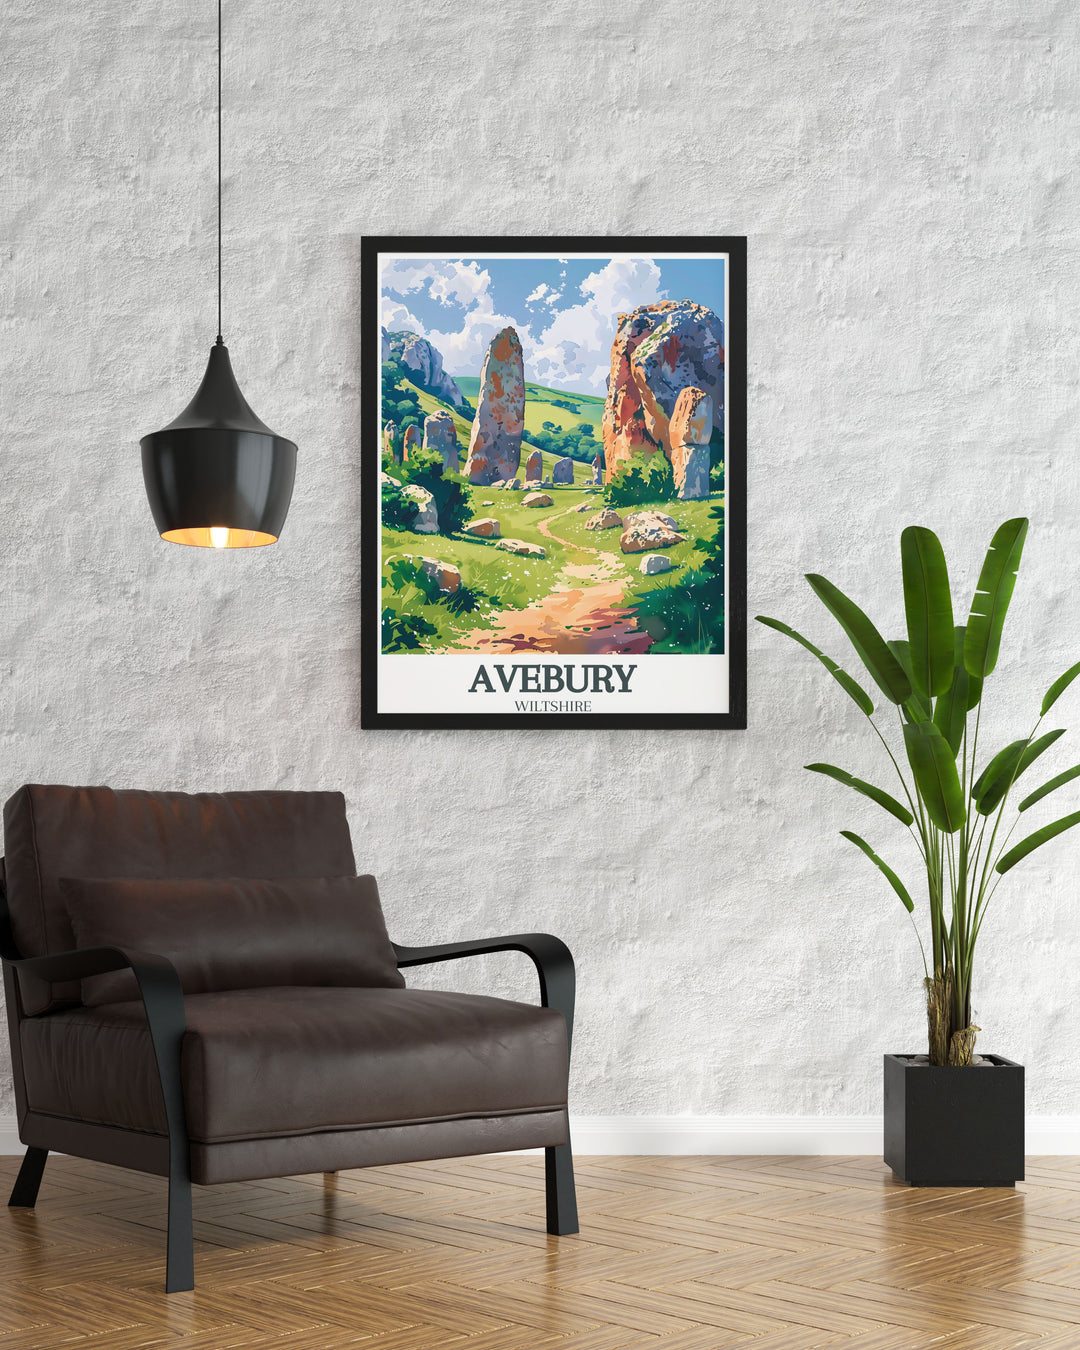 Capture the essence of Englands historical landmarks with this poster featuring Avebury Stone Circle and the North Wessex Downs, perfect for enhancing any living space with their scenic beauty.